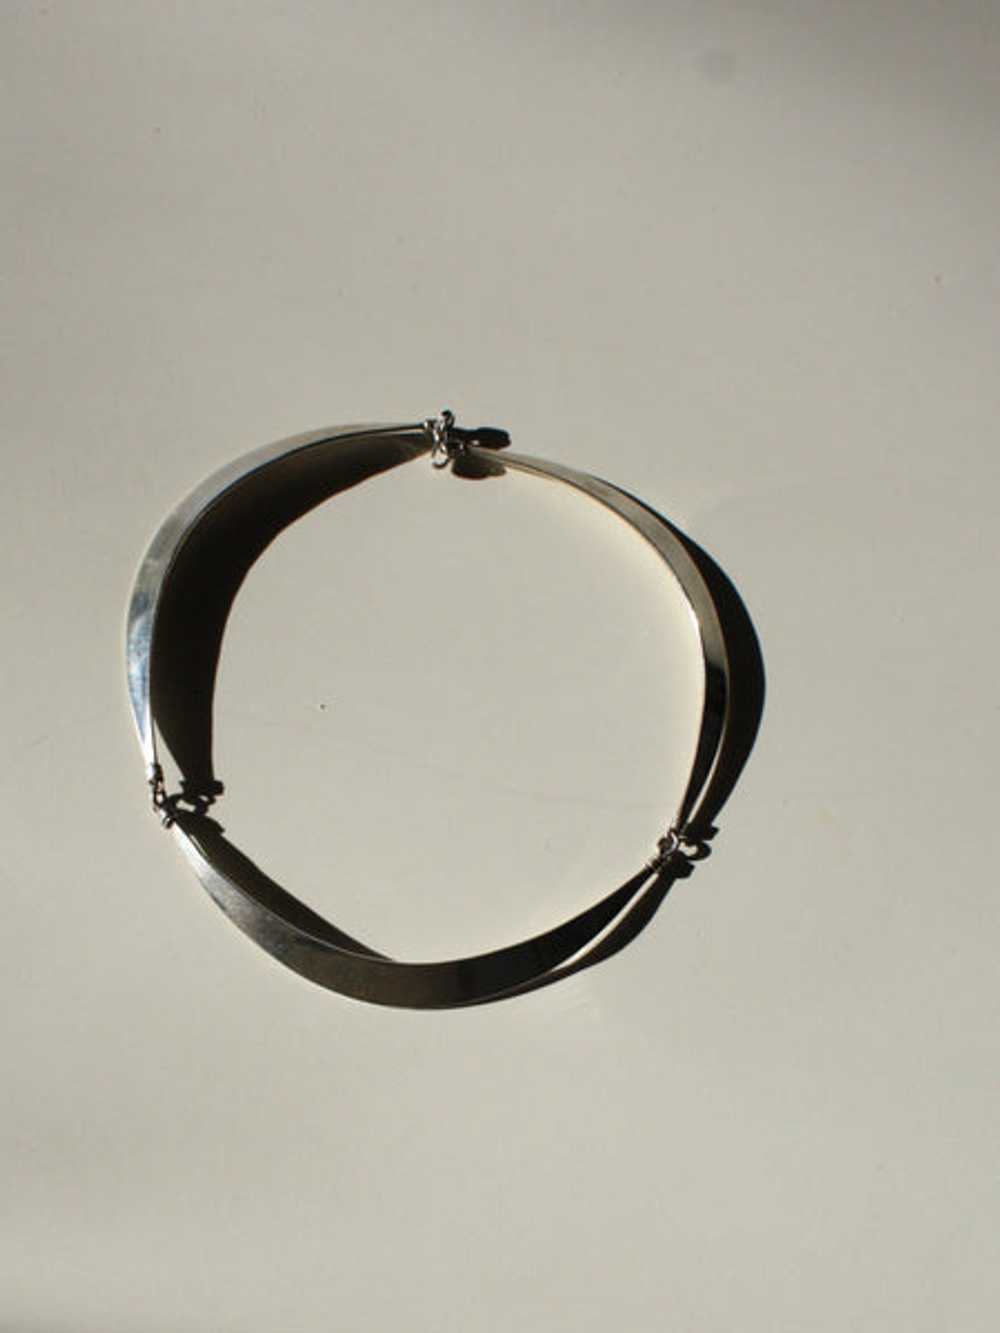 Articulated Sterling Collar - image 4